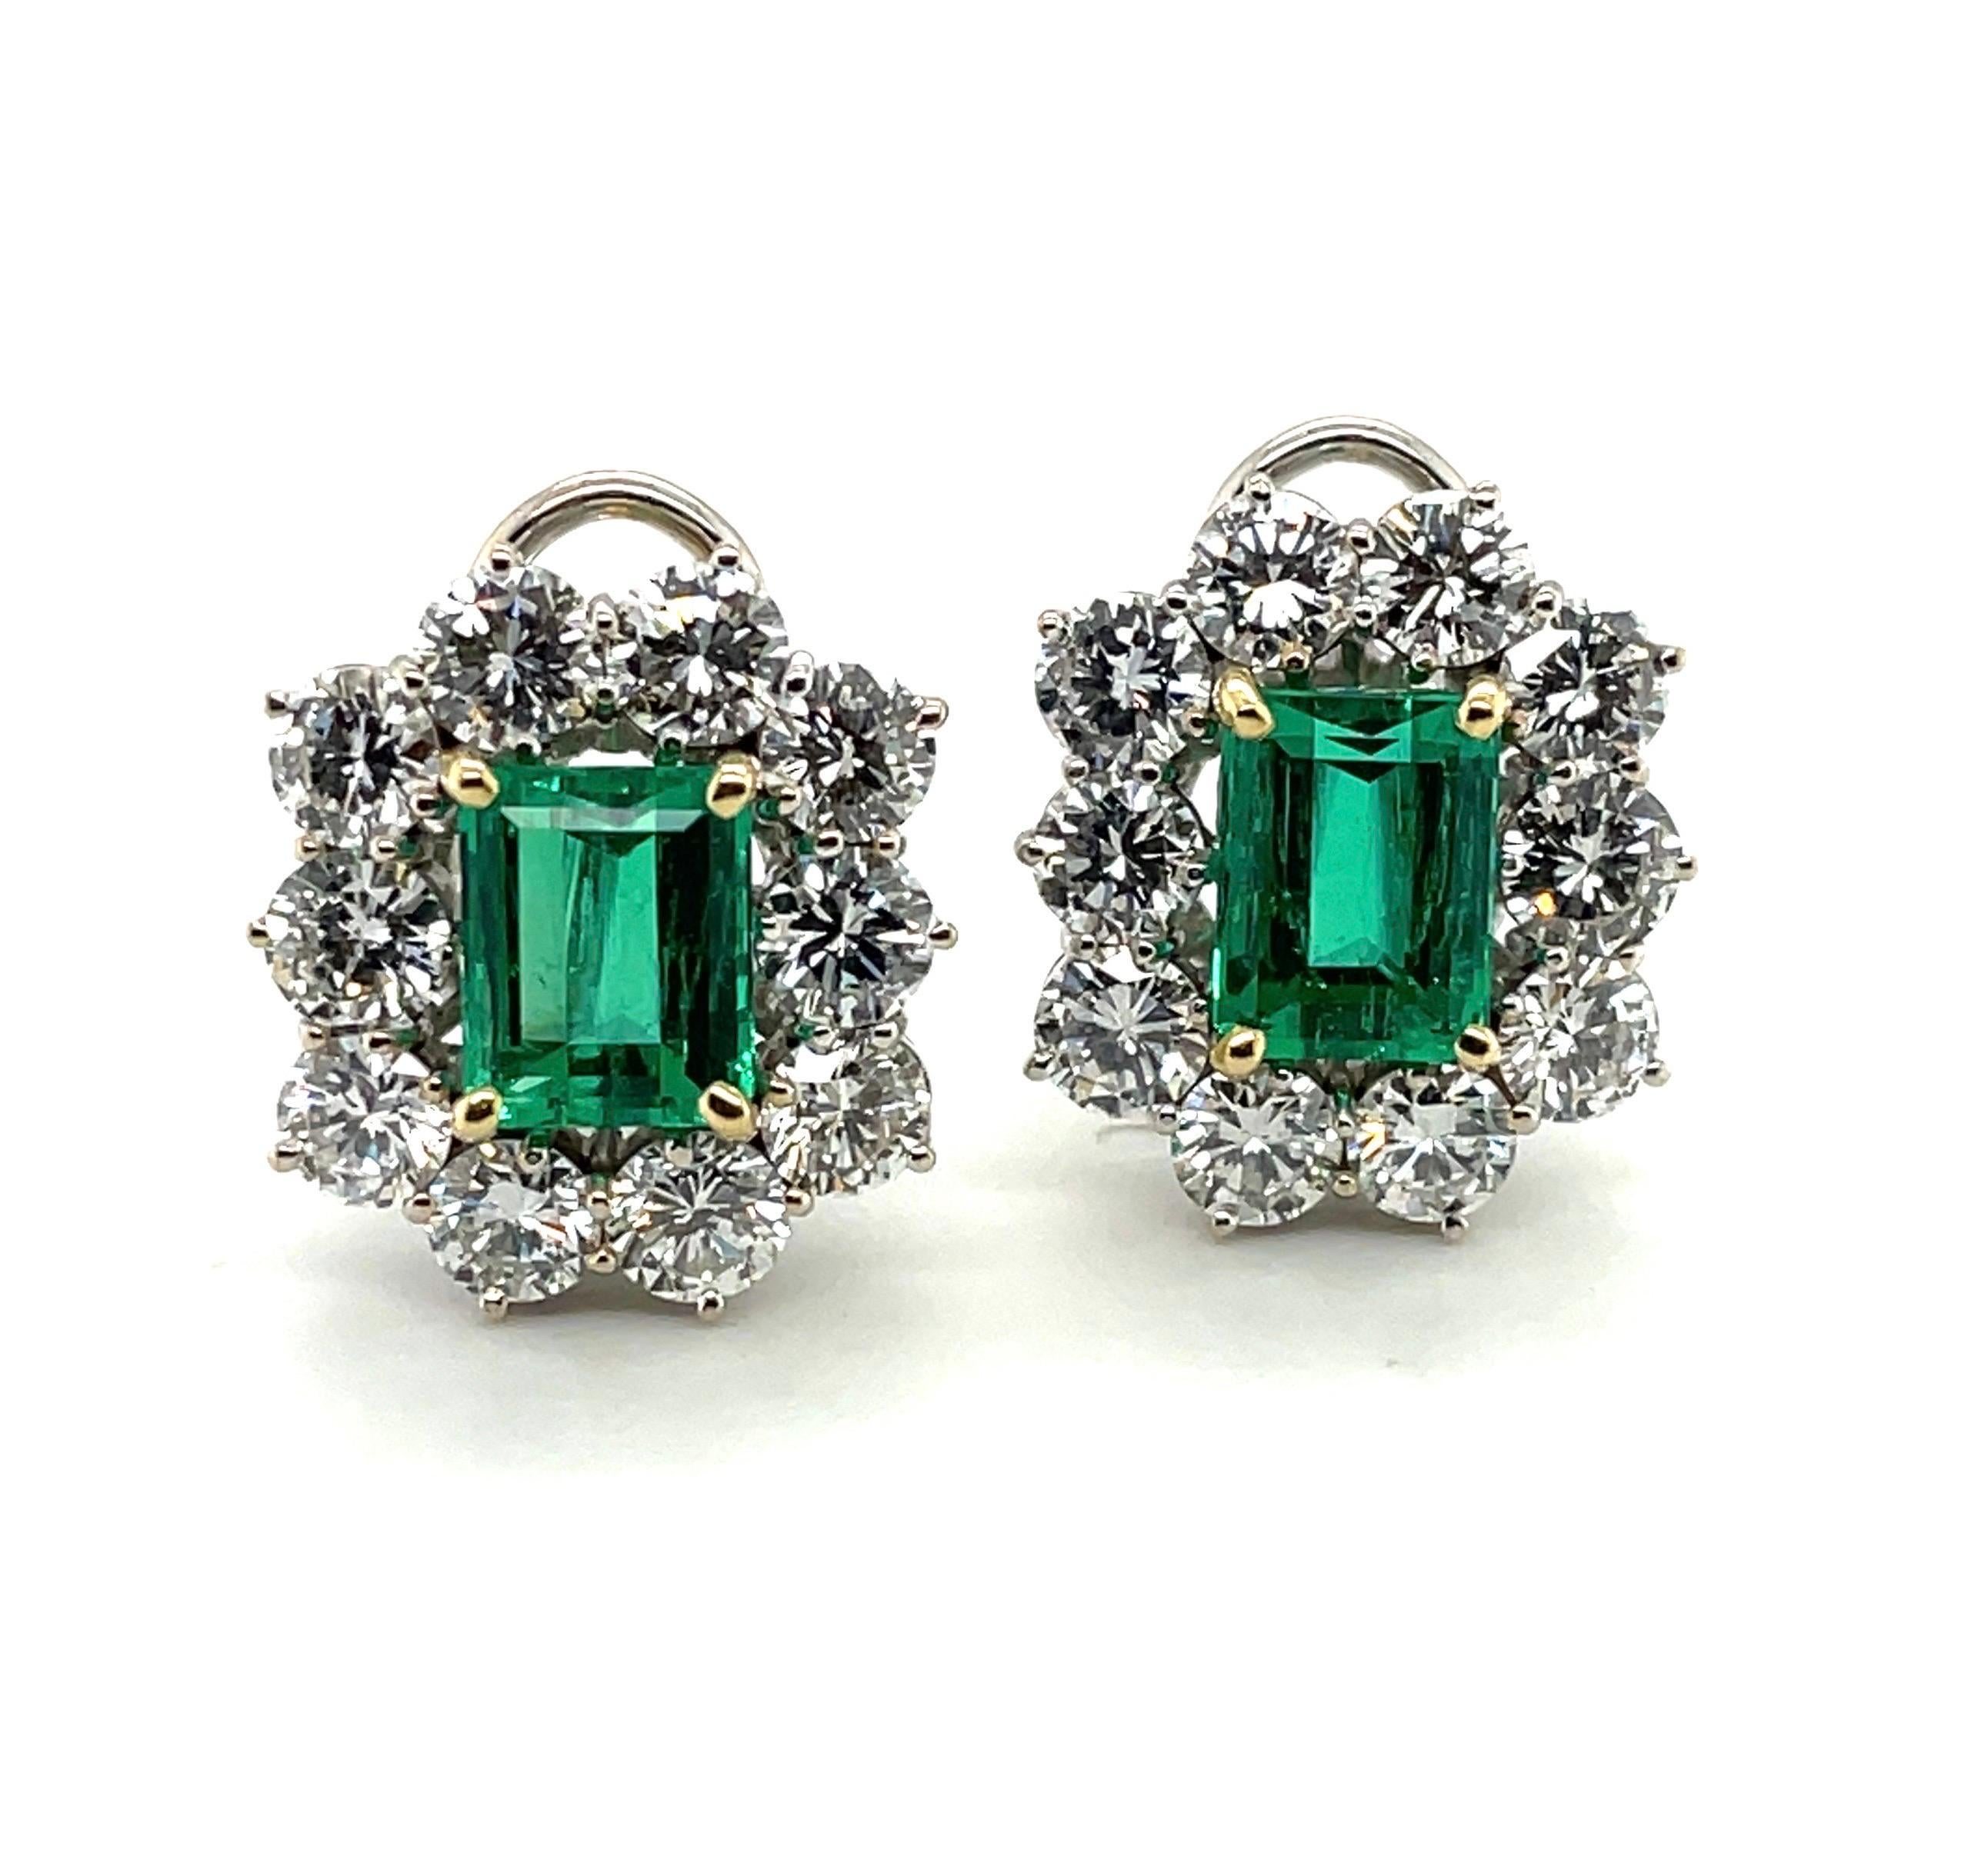 Elegant 18 karat white and yellow gold Colombian emerald and diamond earrings. 

Glamorous earrings of floral design, each set with one octagonal, luminous Colombian emerald of 2.60 carats, resp. 2.37 carats, within a brilliant-cut diamond surround